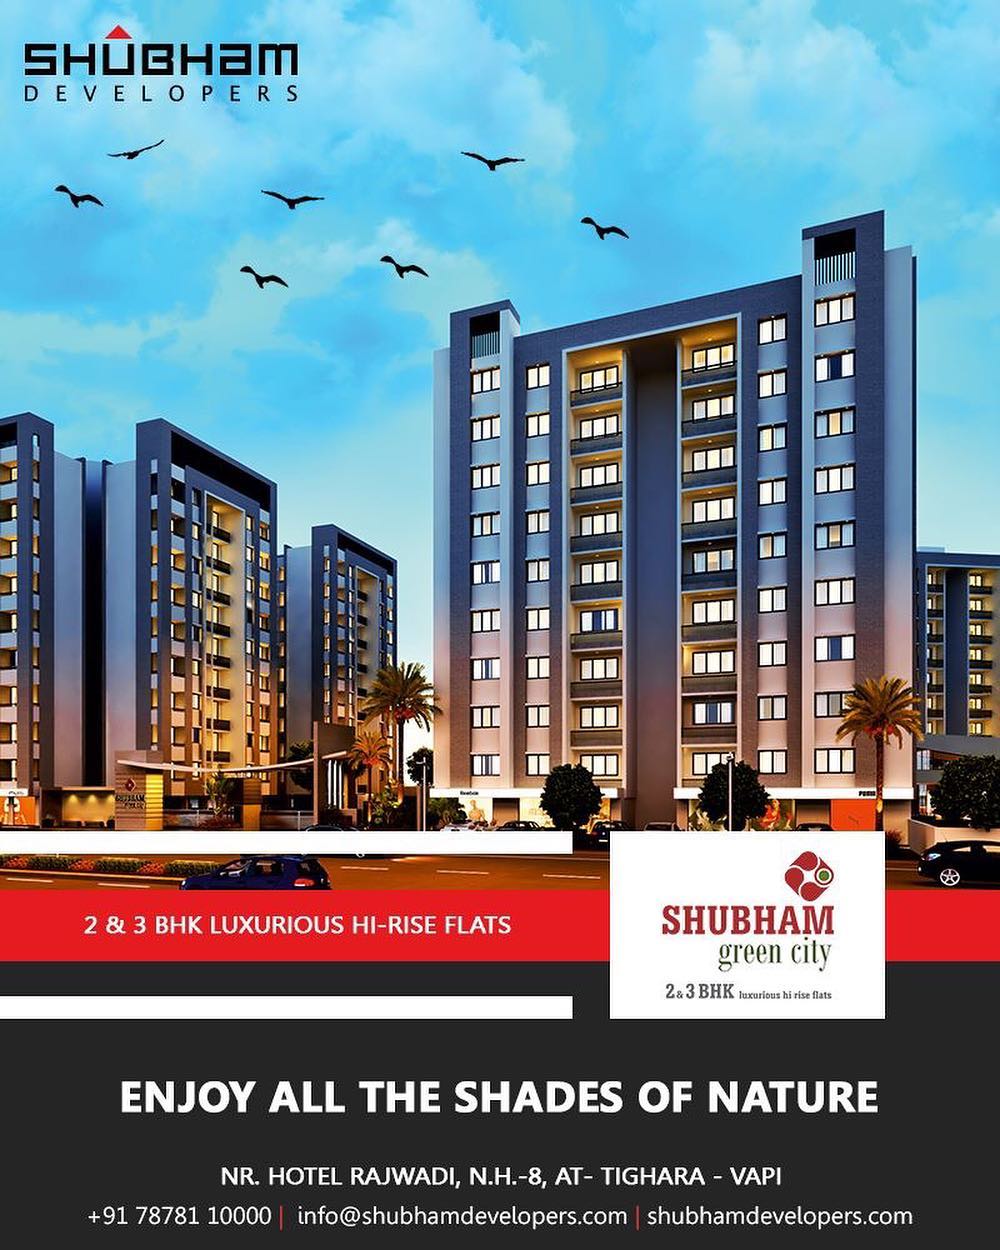 A lifestyle in the heart of the city!

#ShubhamGreenCity #2BHK #3BHK #Ahmedabad #Gujarat #ShubhamDevelopers #RealEstate